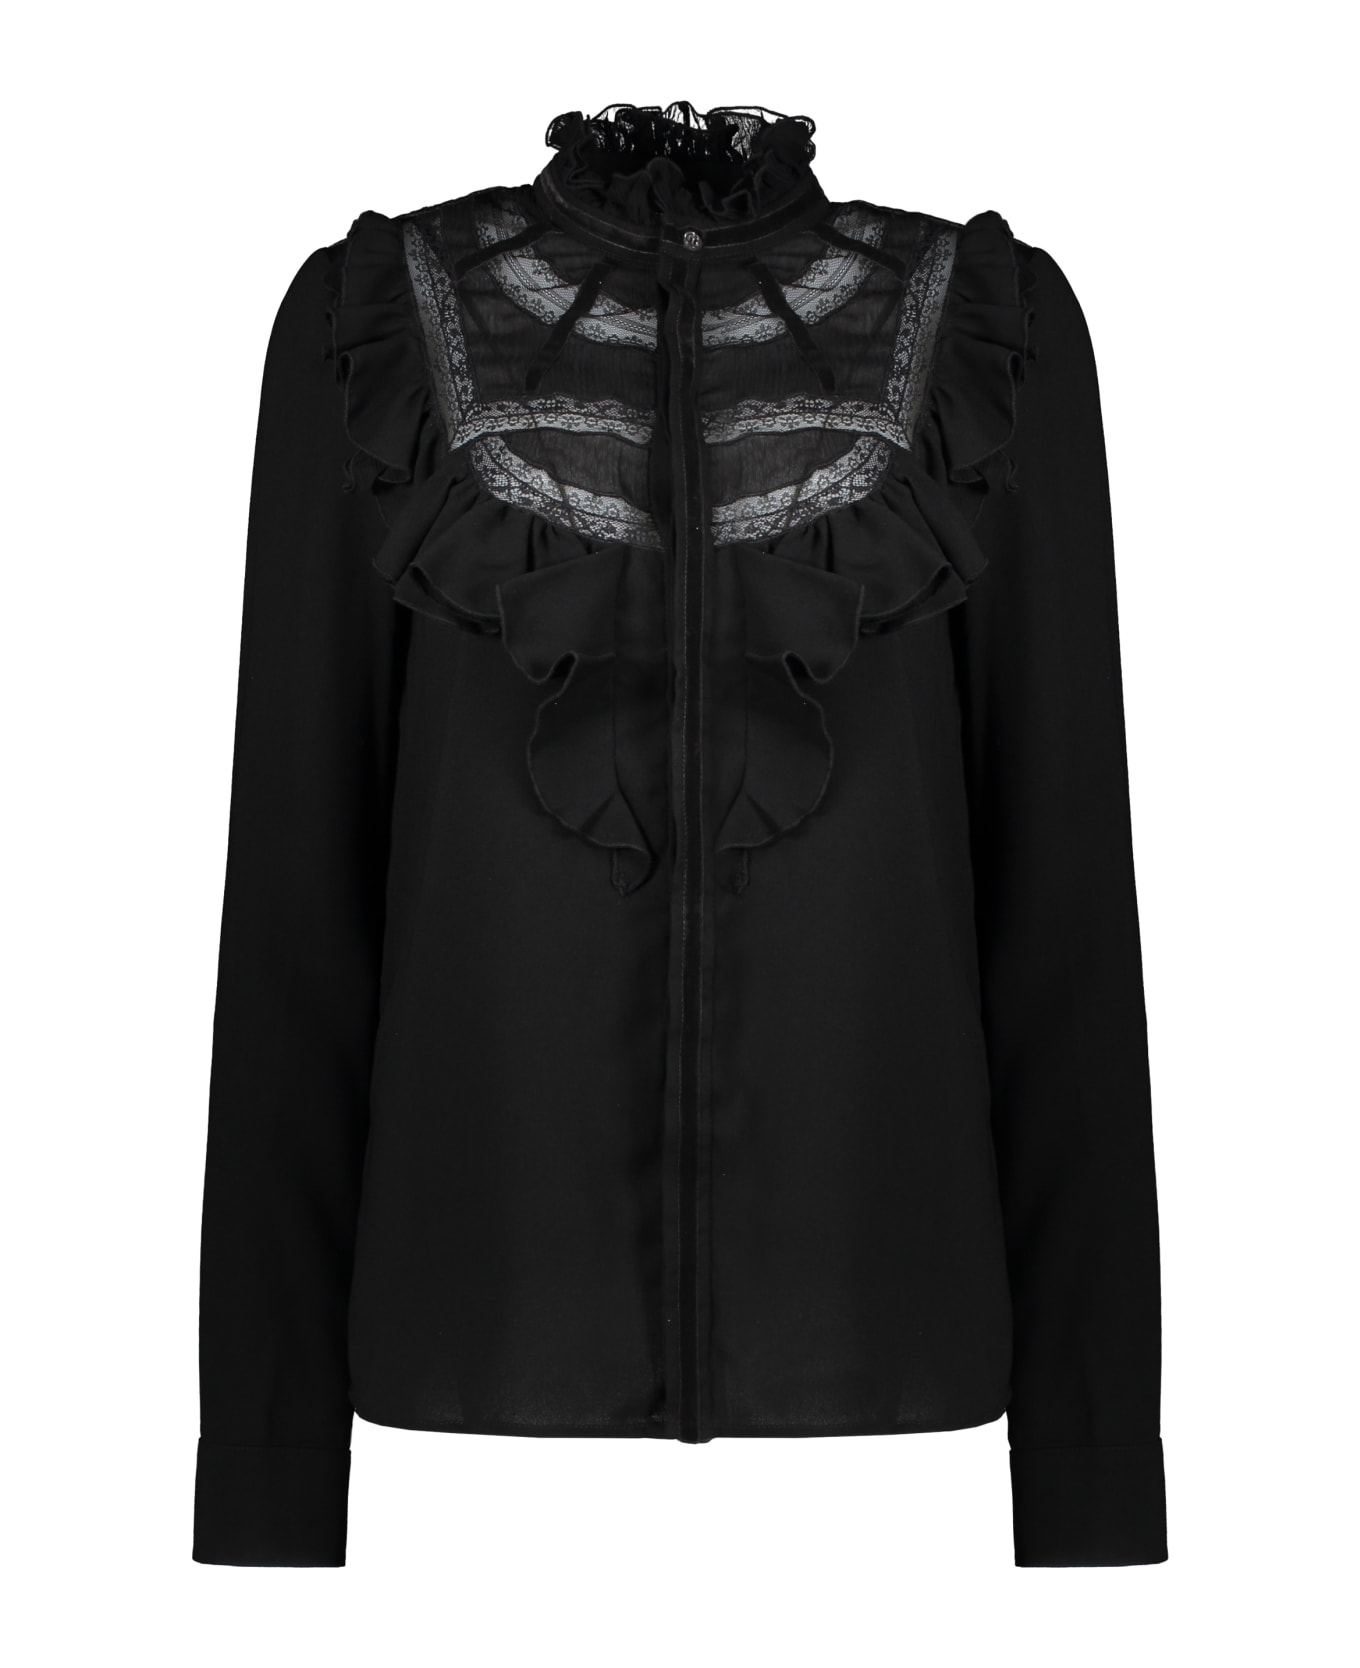 Dsquared2 Embroidered Cotton Blouse - black ブラウス